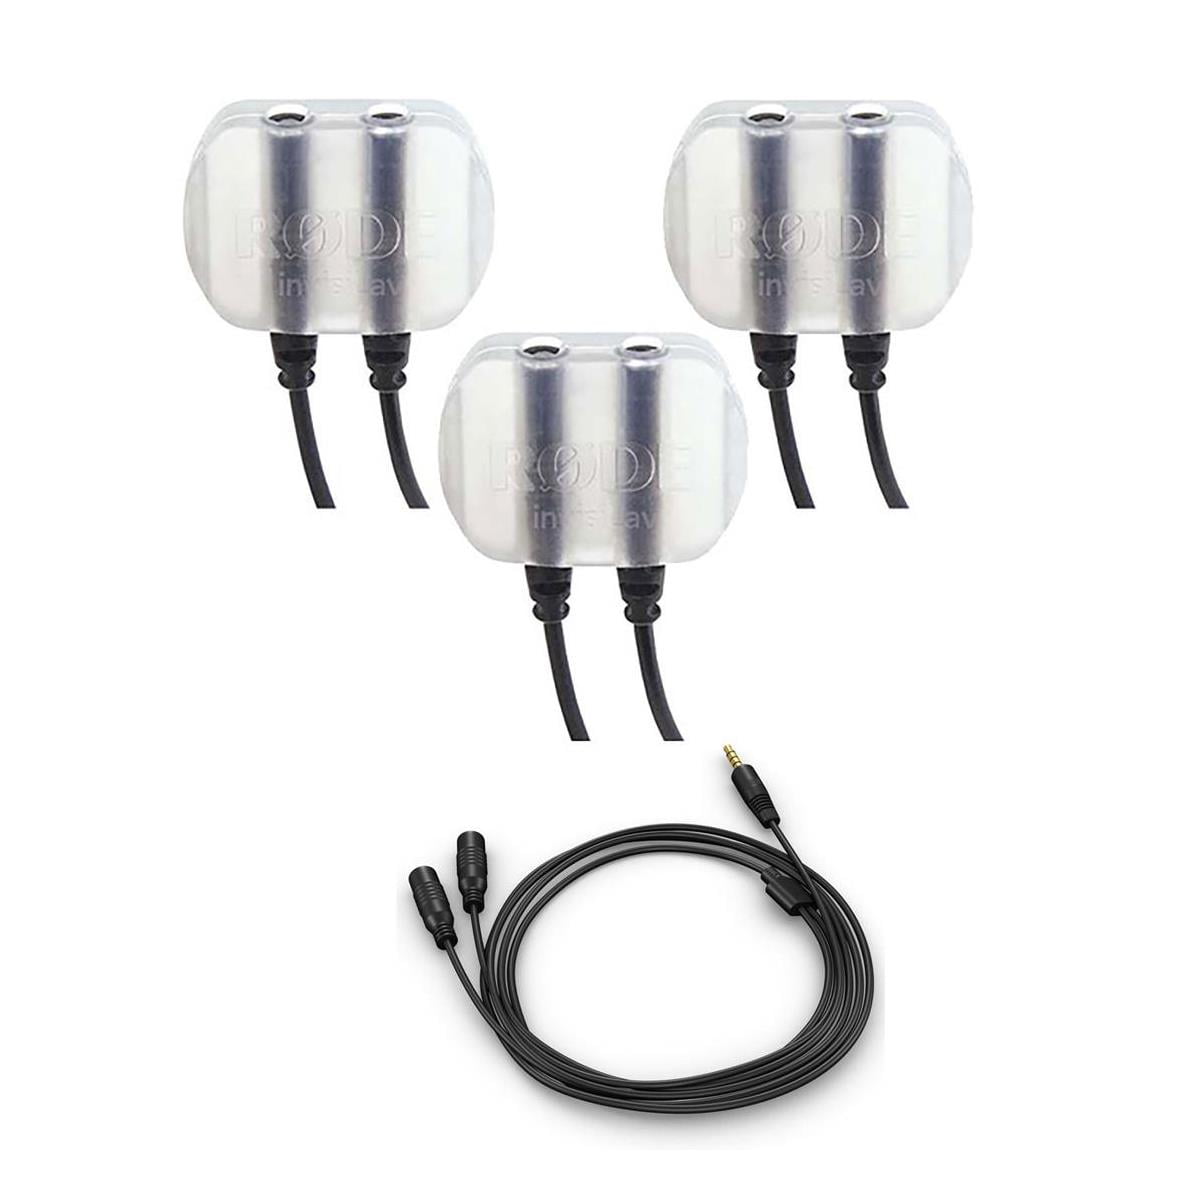 Rode invisiLav Discreet Lavalier Microphone Skin Safe Mounting System 3-Pack 